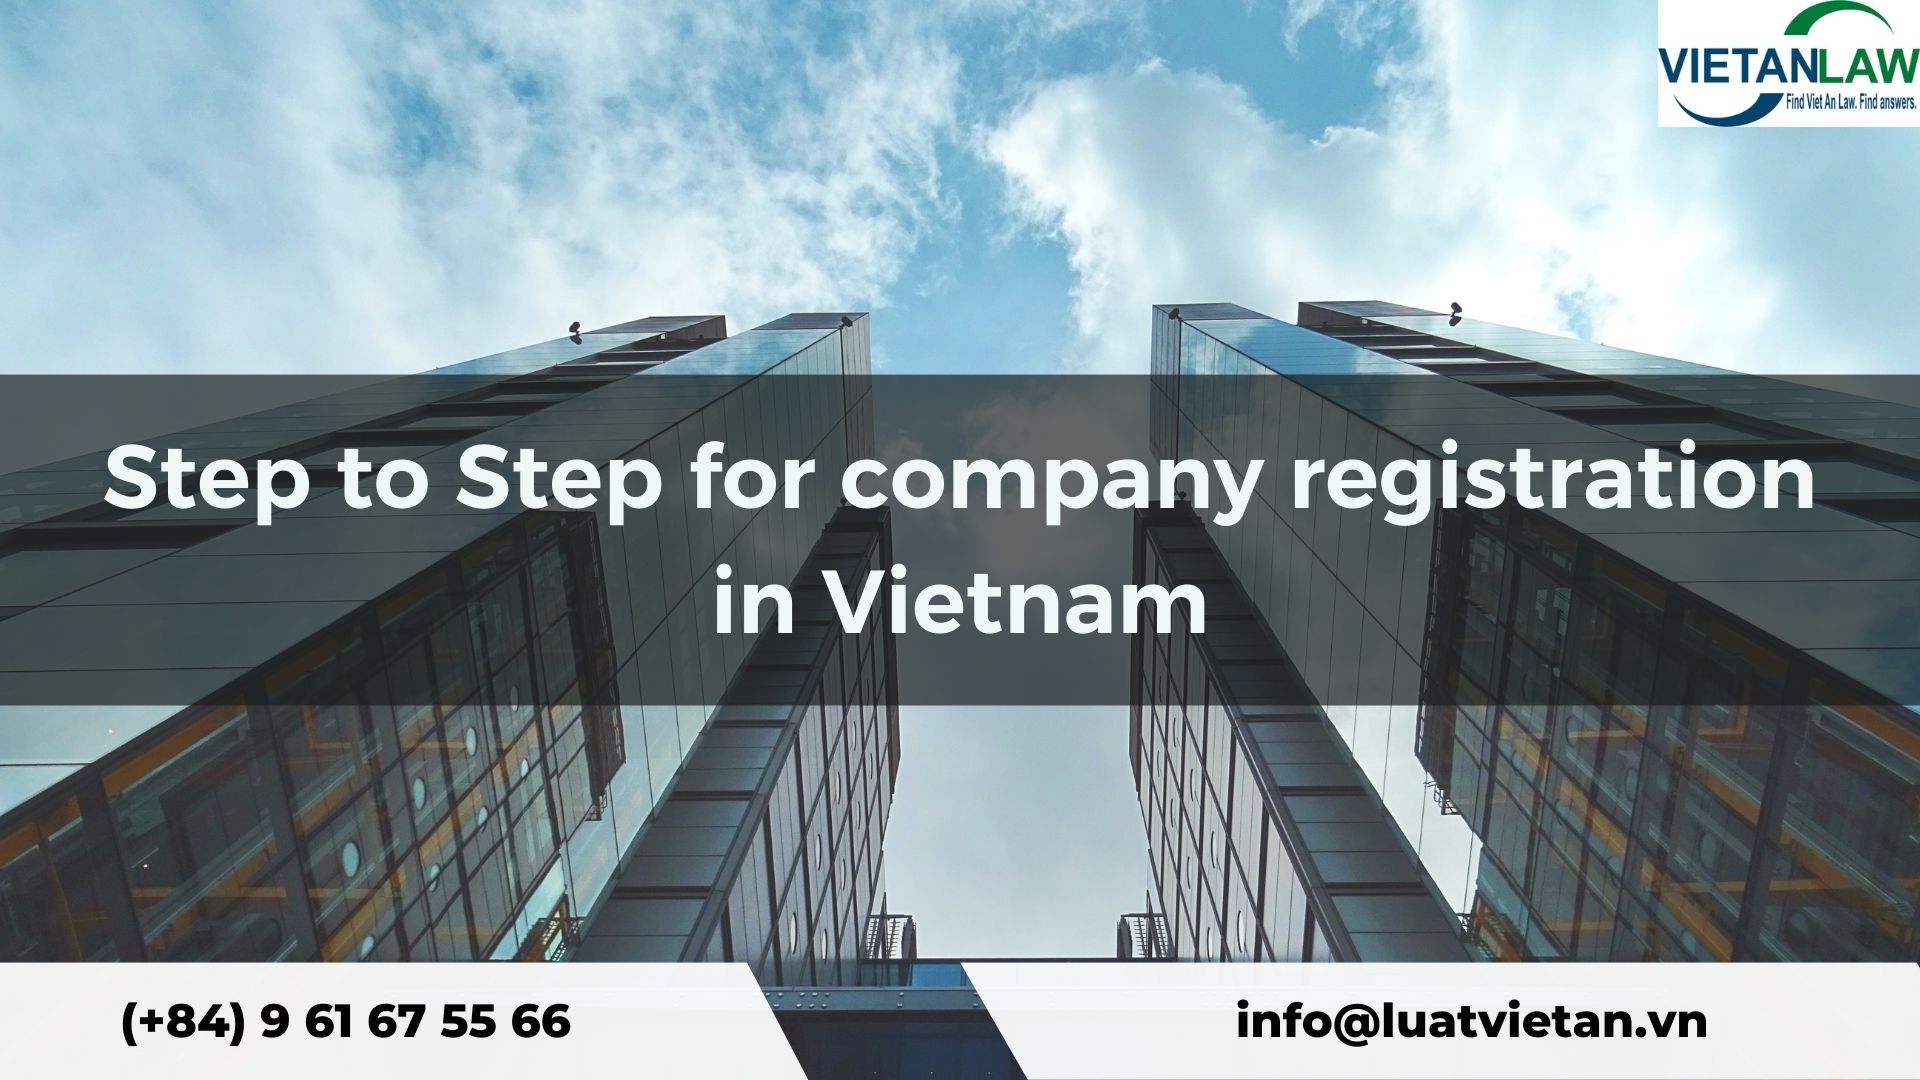 Step to Step for company registration in Vietnam